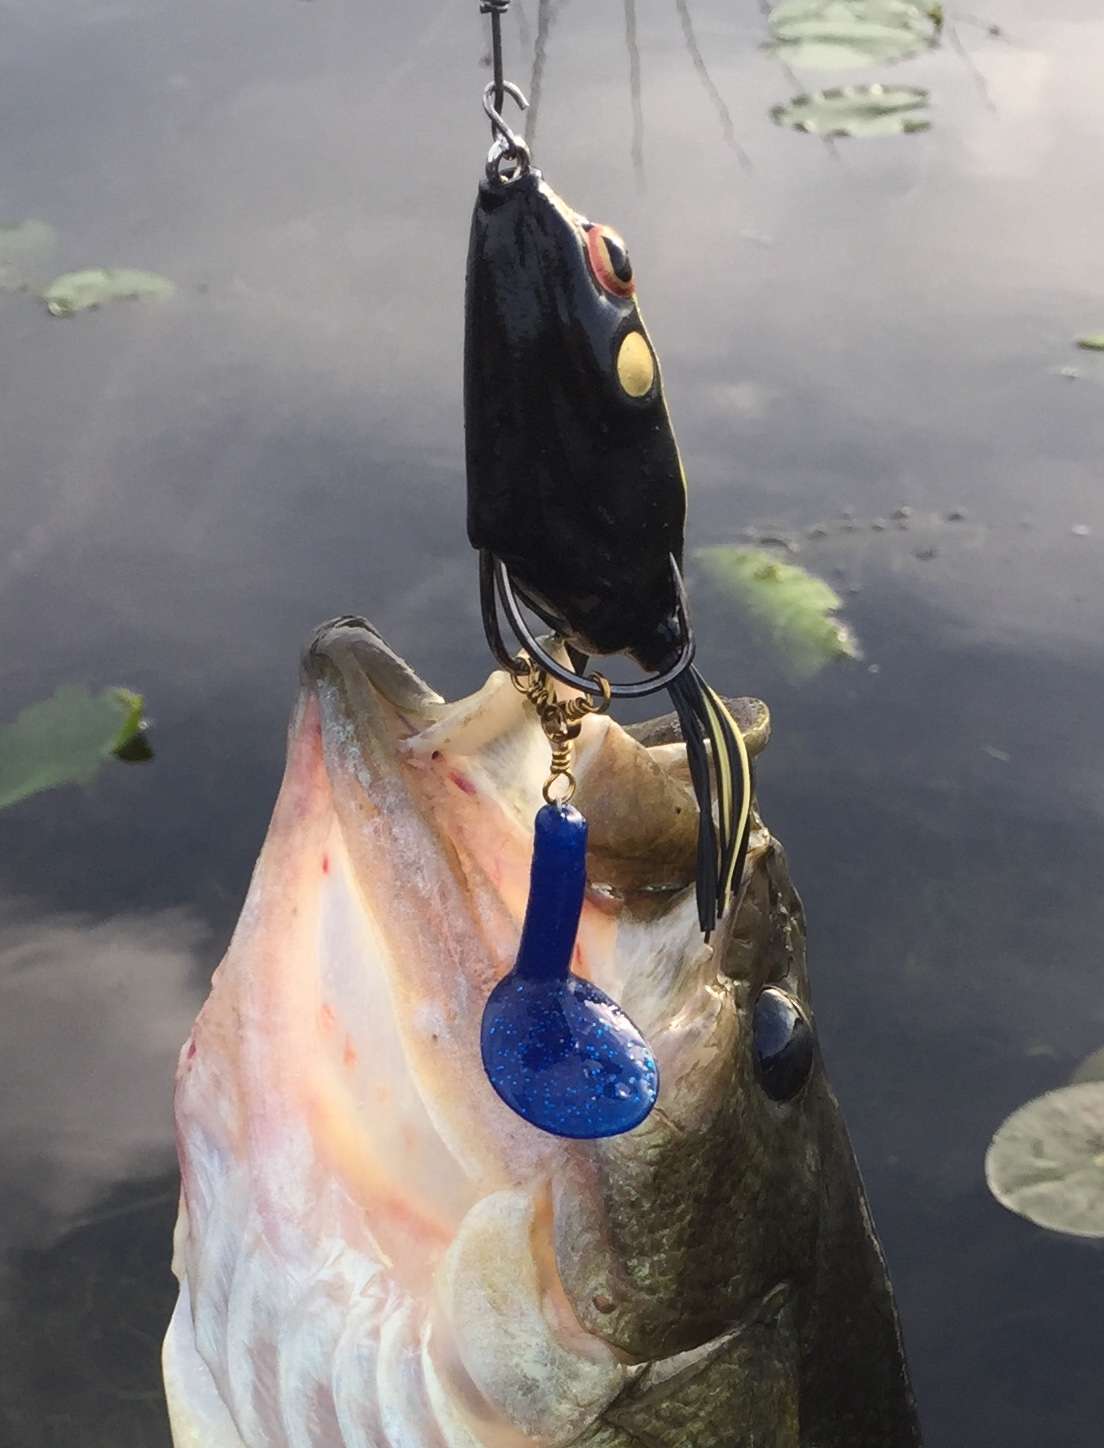 Initial Thoughts: Review of Teckel Sprinker Frog vs. Booyah Toad Runner vs.  Homemade Teckel Sprinker Frog - Fishing Tackle - Bass Fishing Forums